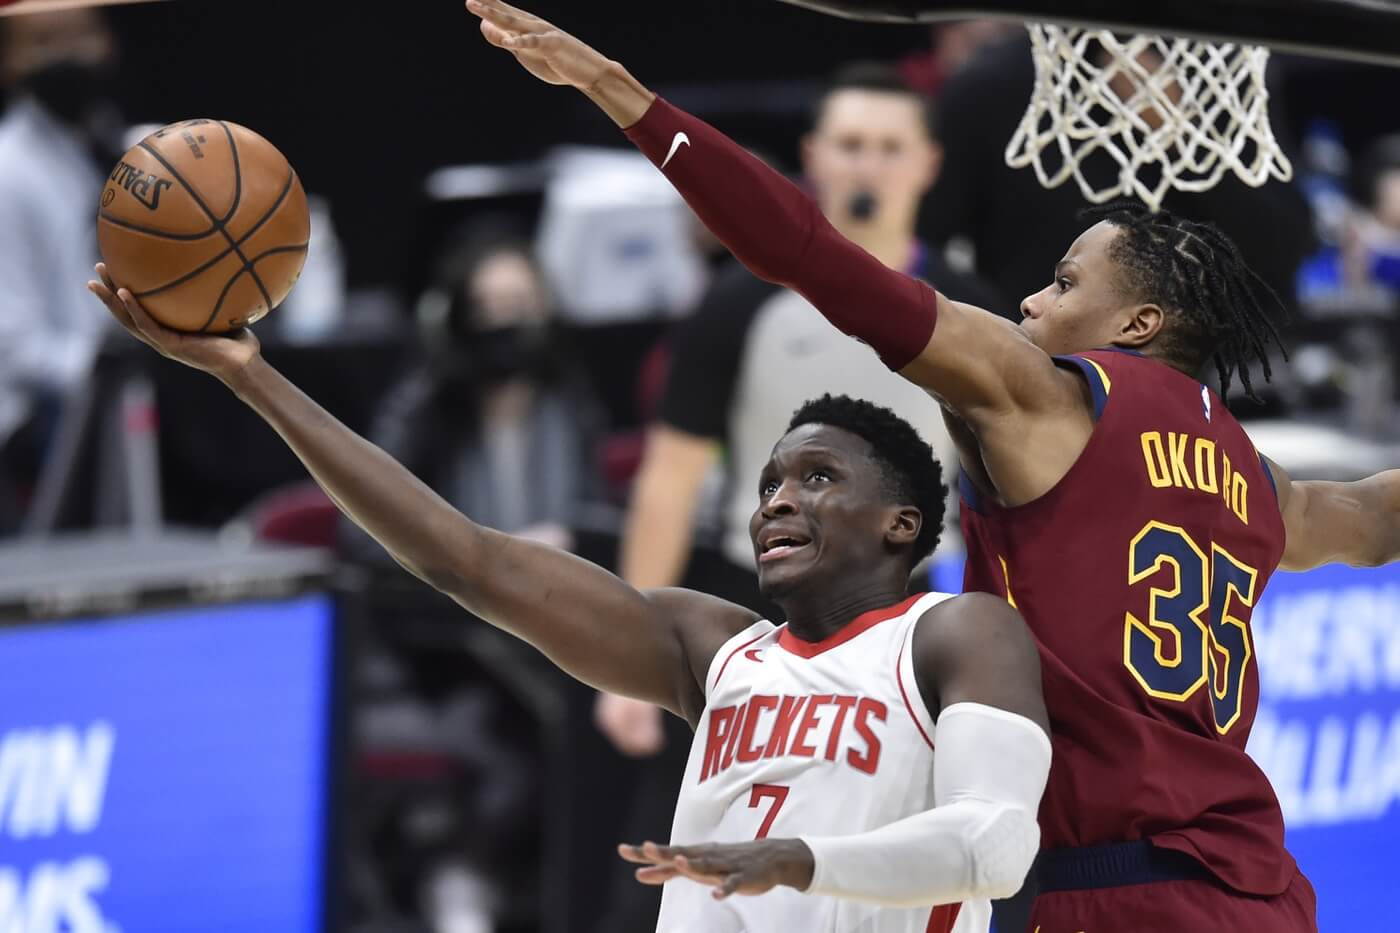 Feb 24, 2021; Cleveland, Ohio, USA; Houston Rockets guard Victor Oladipo (7) drives against Cleveland Cavaliers guard Isaac Okoro (35) in the fourth quarter at Rocket Mortgage FieldHouse. Mandatory Credit: David Richard-USA TODAY Sports